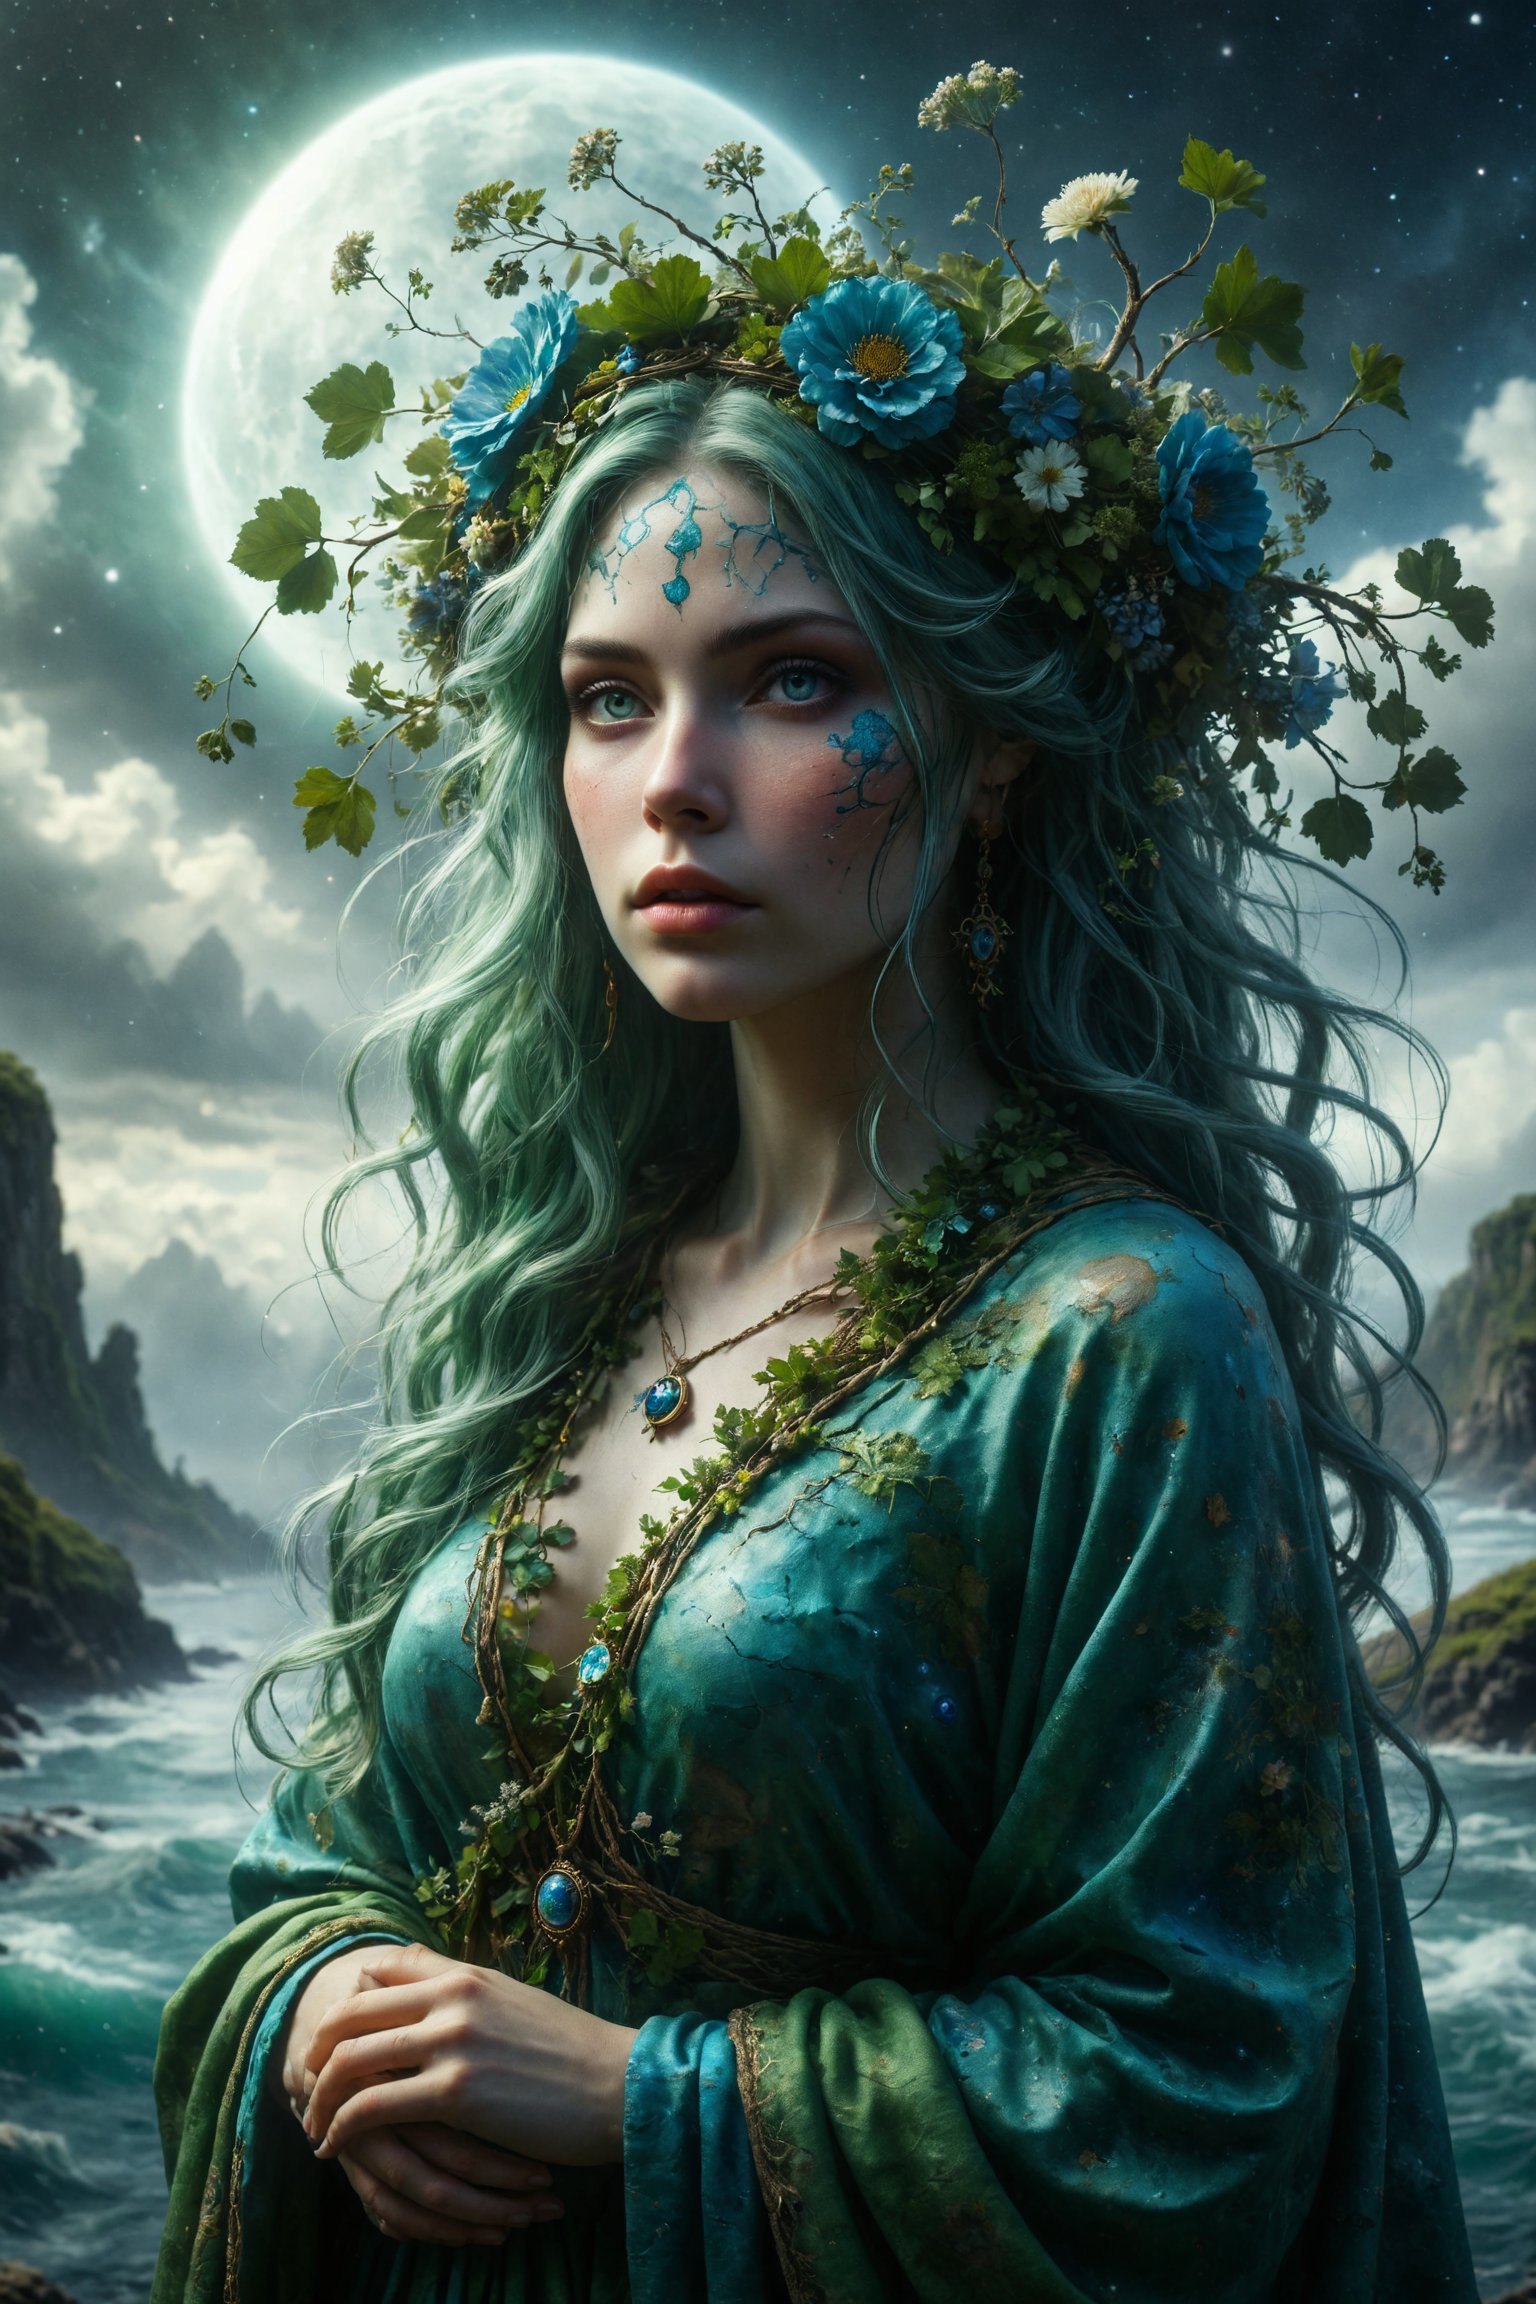 Queen of earth Gaia full budy, with his planet in the background, is a fertile and generous goddess, with an appearance that reflects the abundance of nature. She wears a green and blue mantle, full body, representing Earth's oceans and continents. She has the form of a robust and strong woman, with green hair and eyes that reflect the diversity of life on Earth. She wears a robe that shows the continents and oceans, and has branches and flowers tangled in her hair. full body